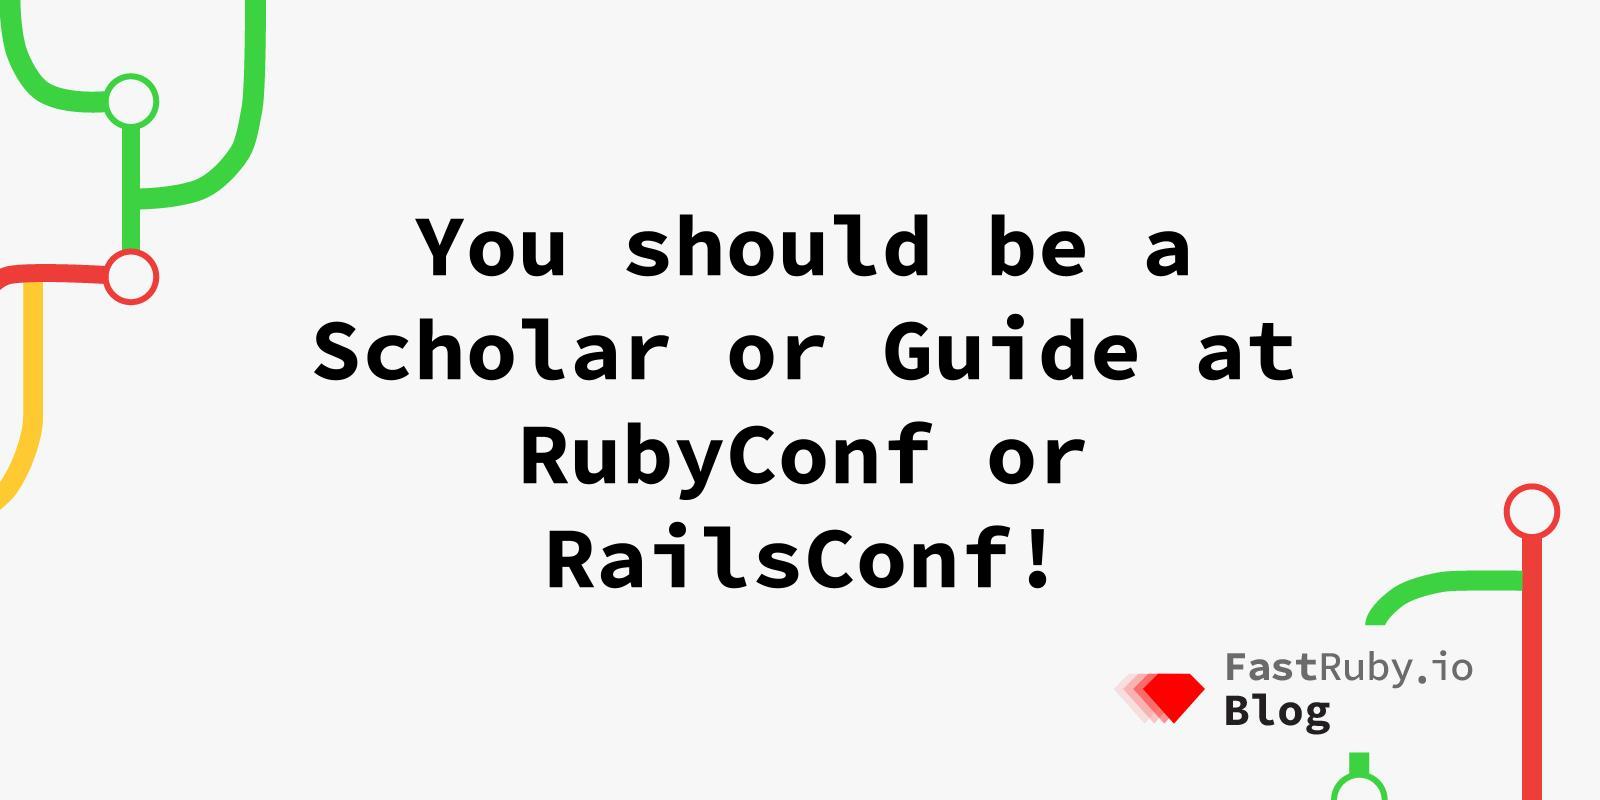 You should be a Scholar or Guide at RubyConf or RailsConf!